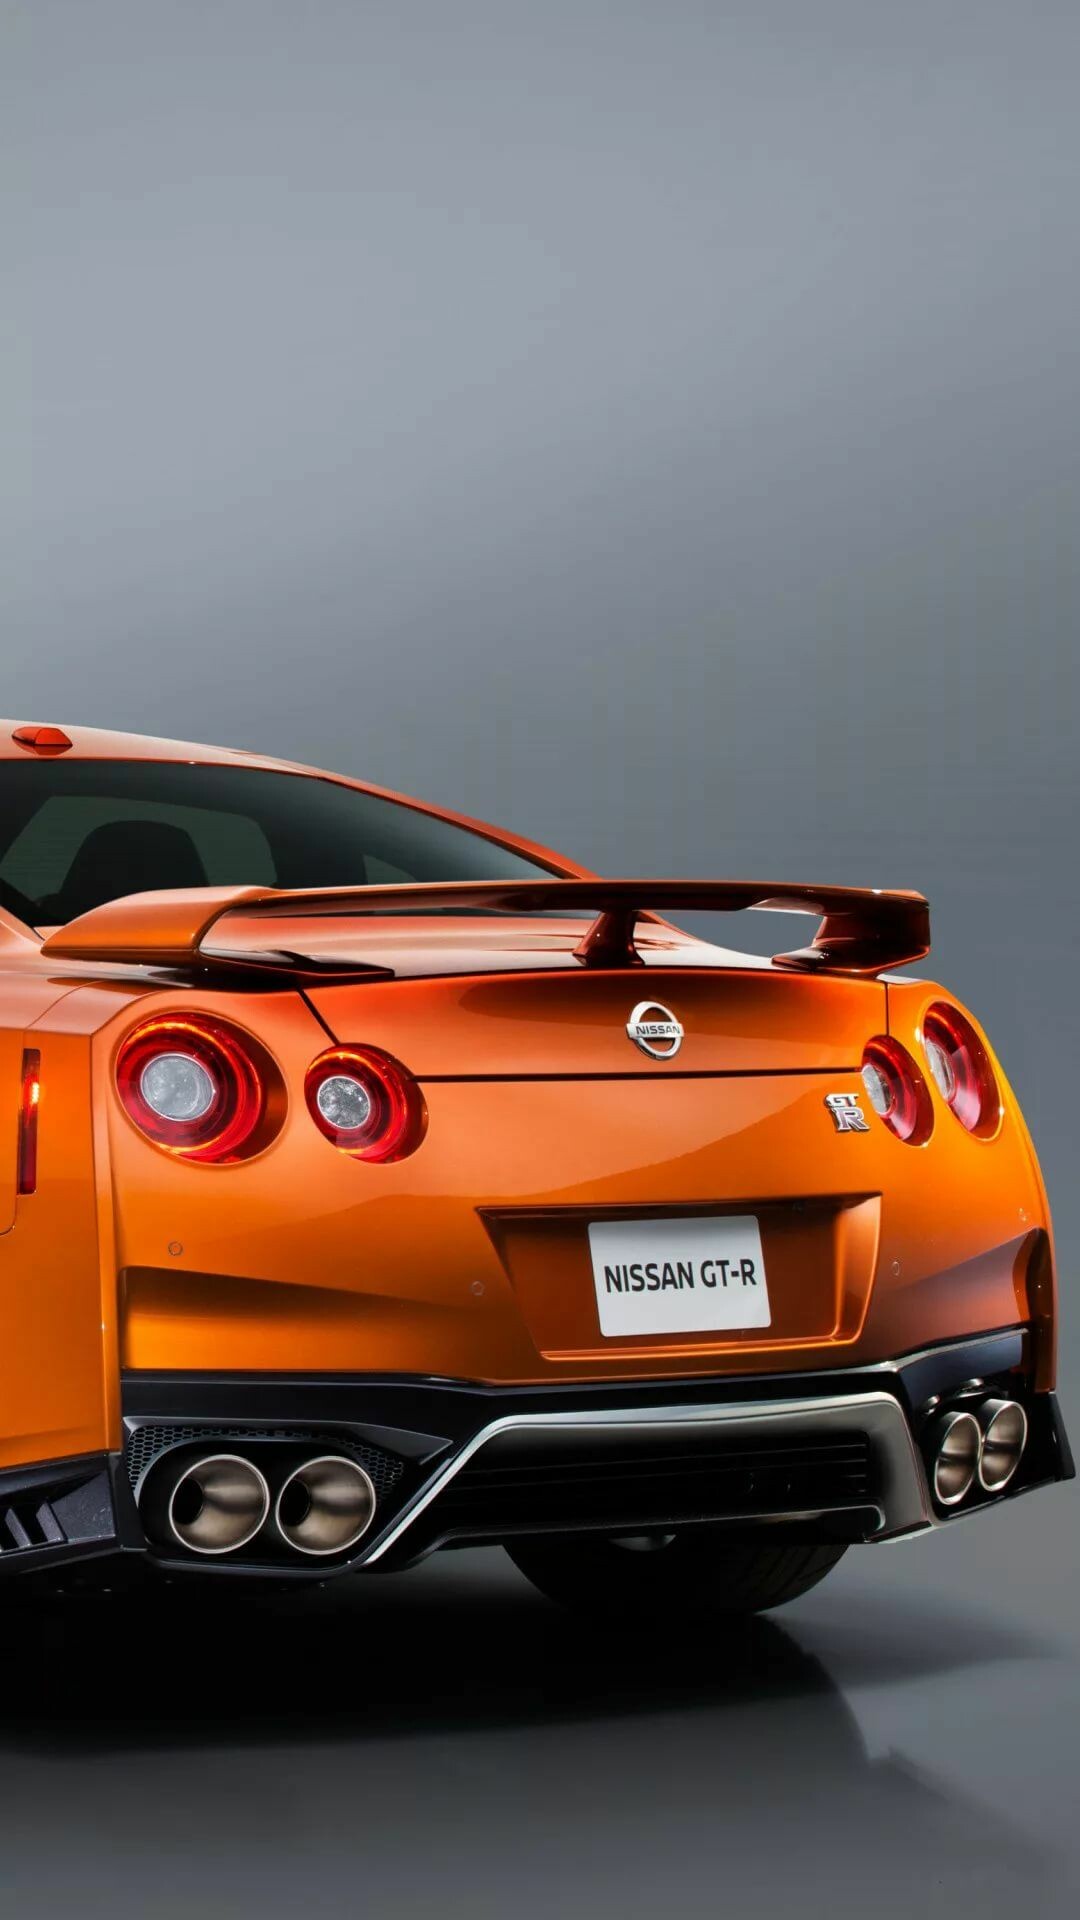 Nissan: Japanese company, Has more than 80 years of experience in vehicle manufacturing. 1080x1920 Full HD Wallpaper.